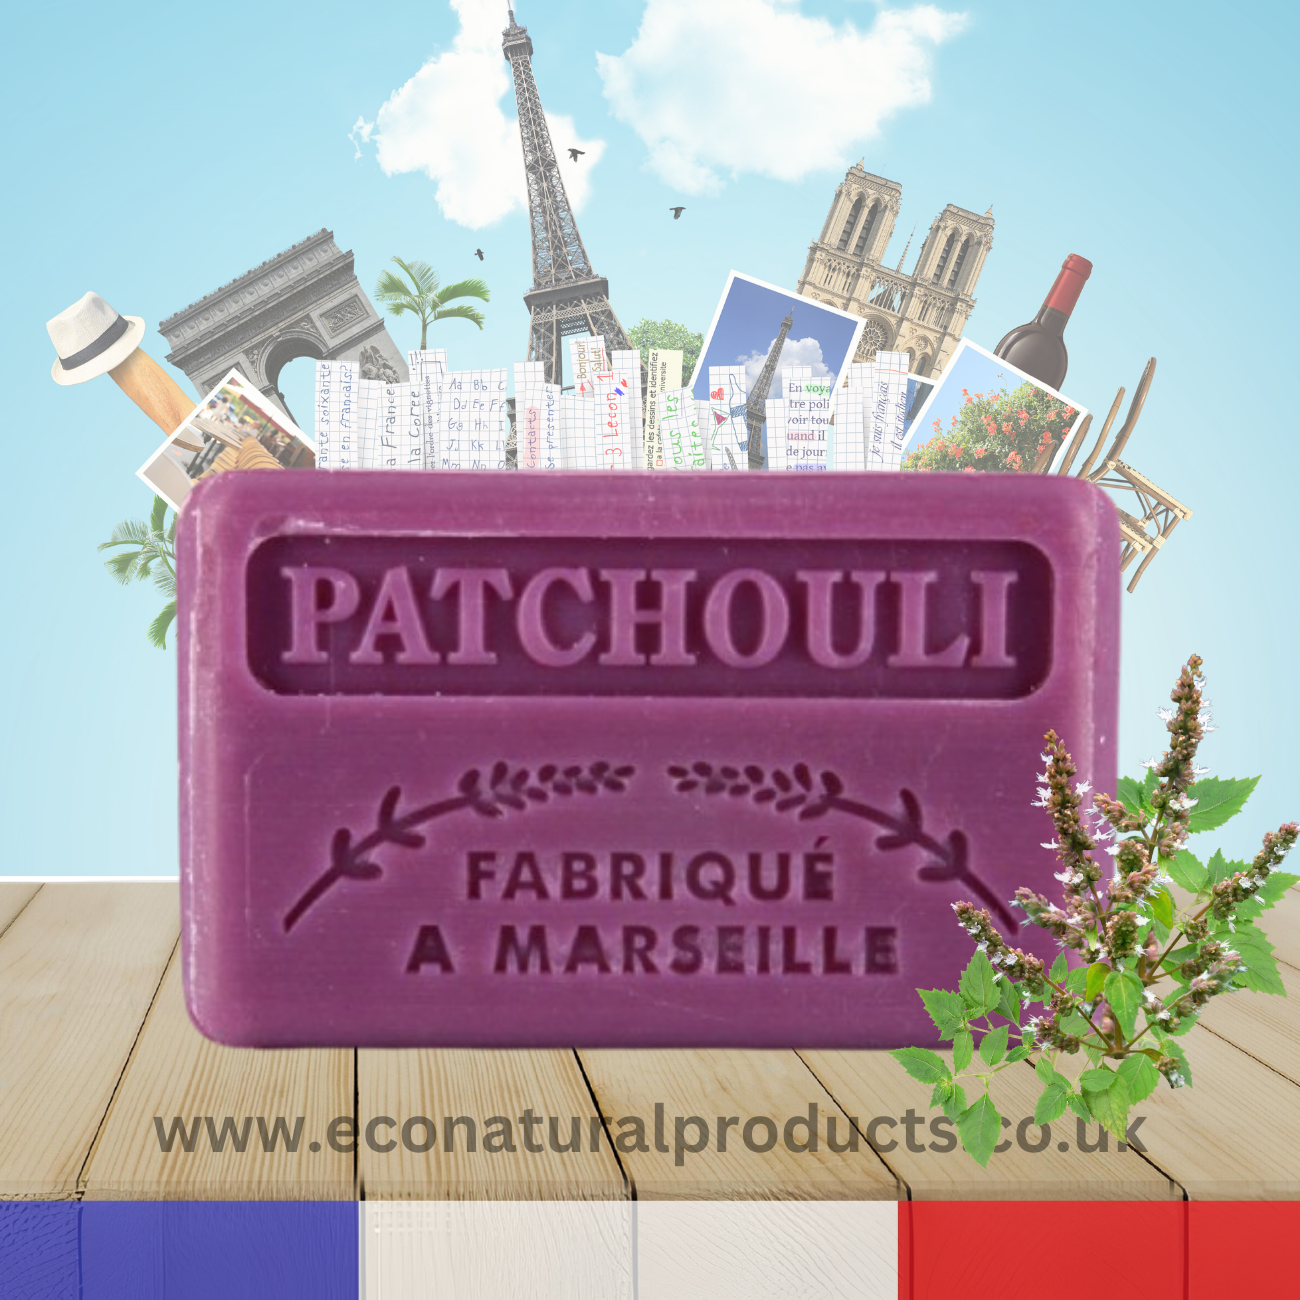 French Marseille Soap Patchouli 125g